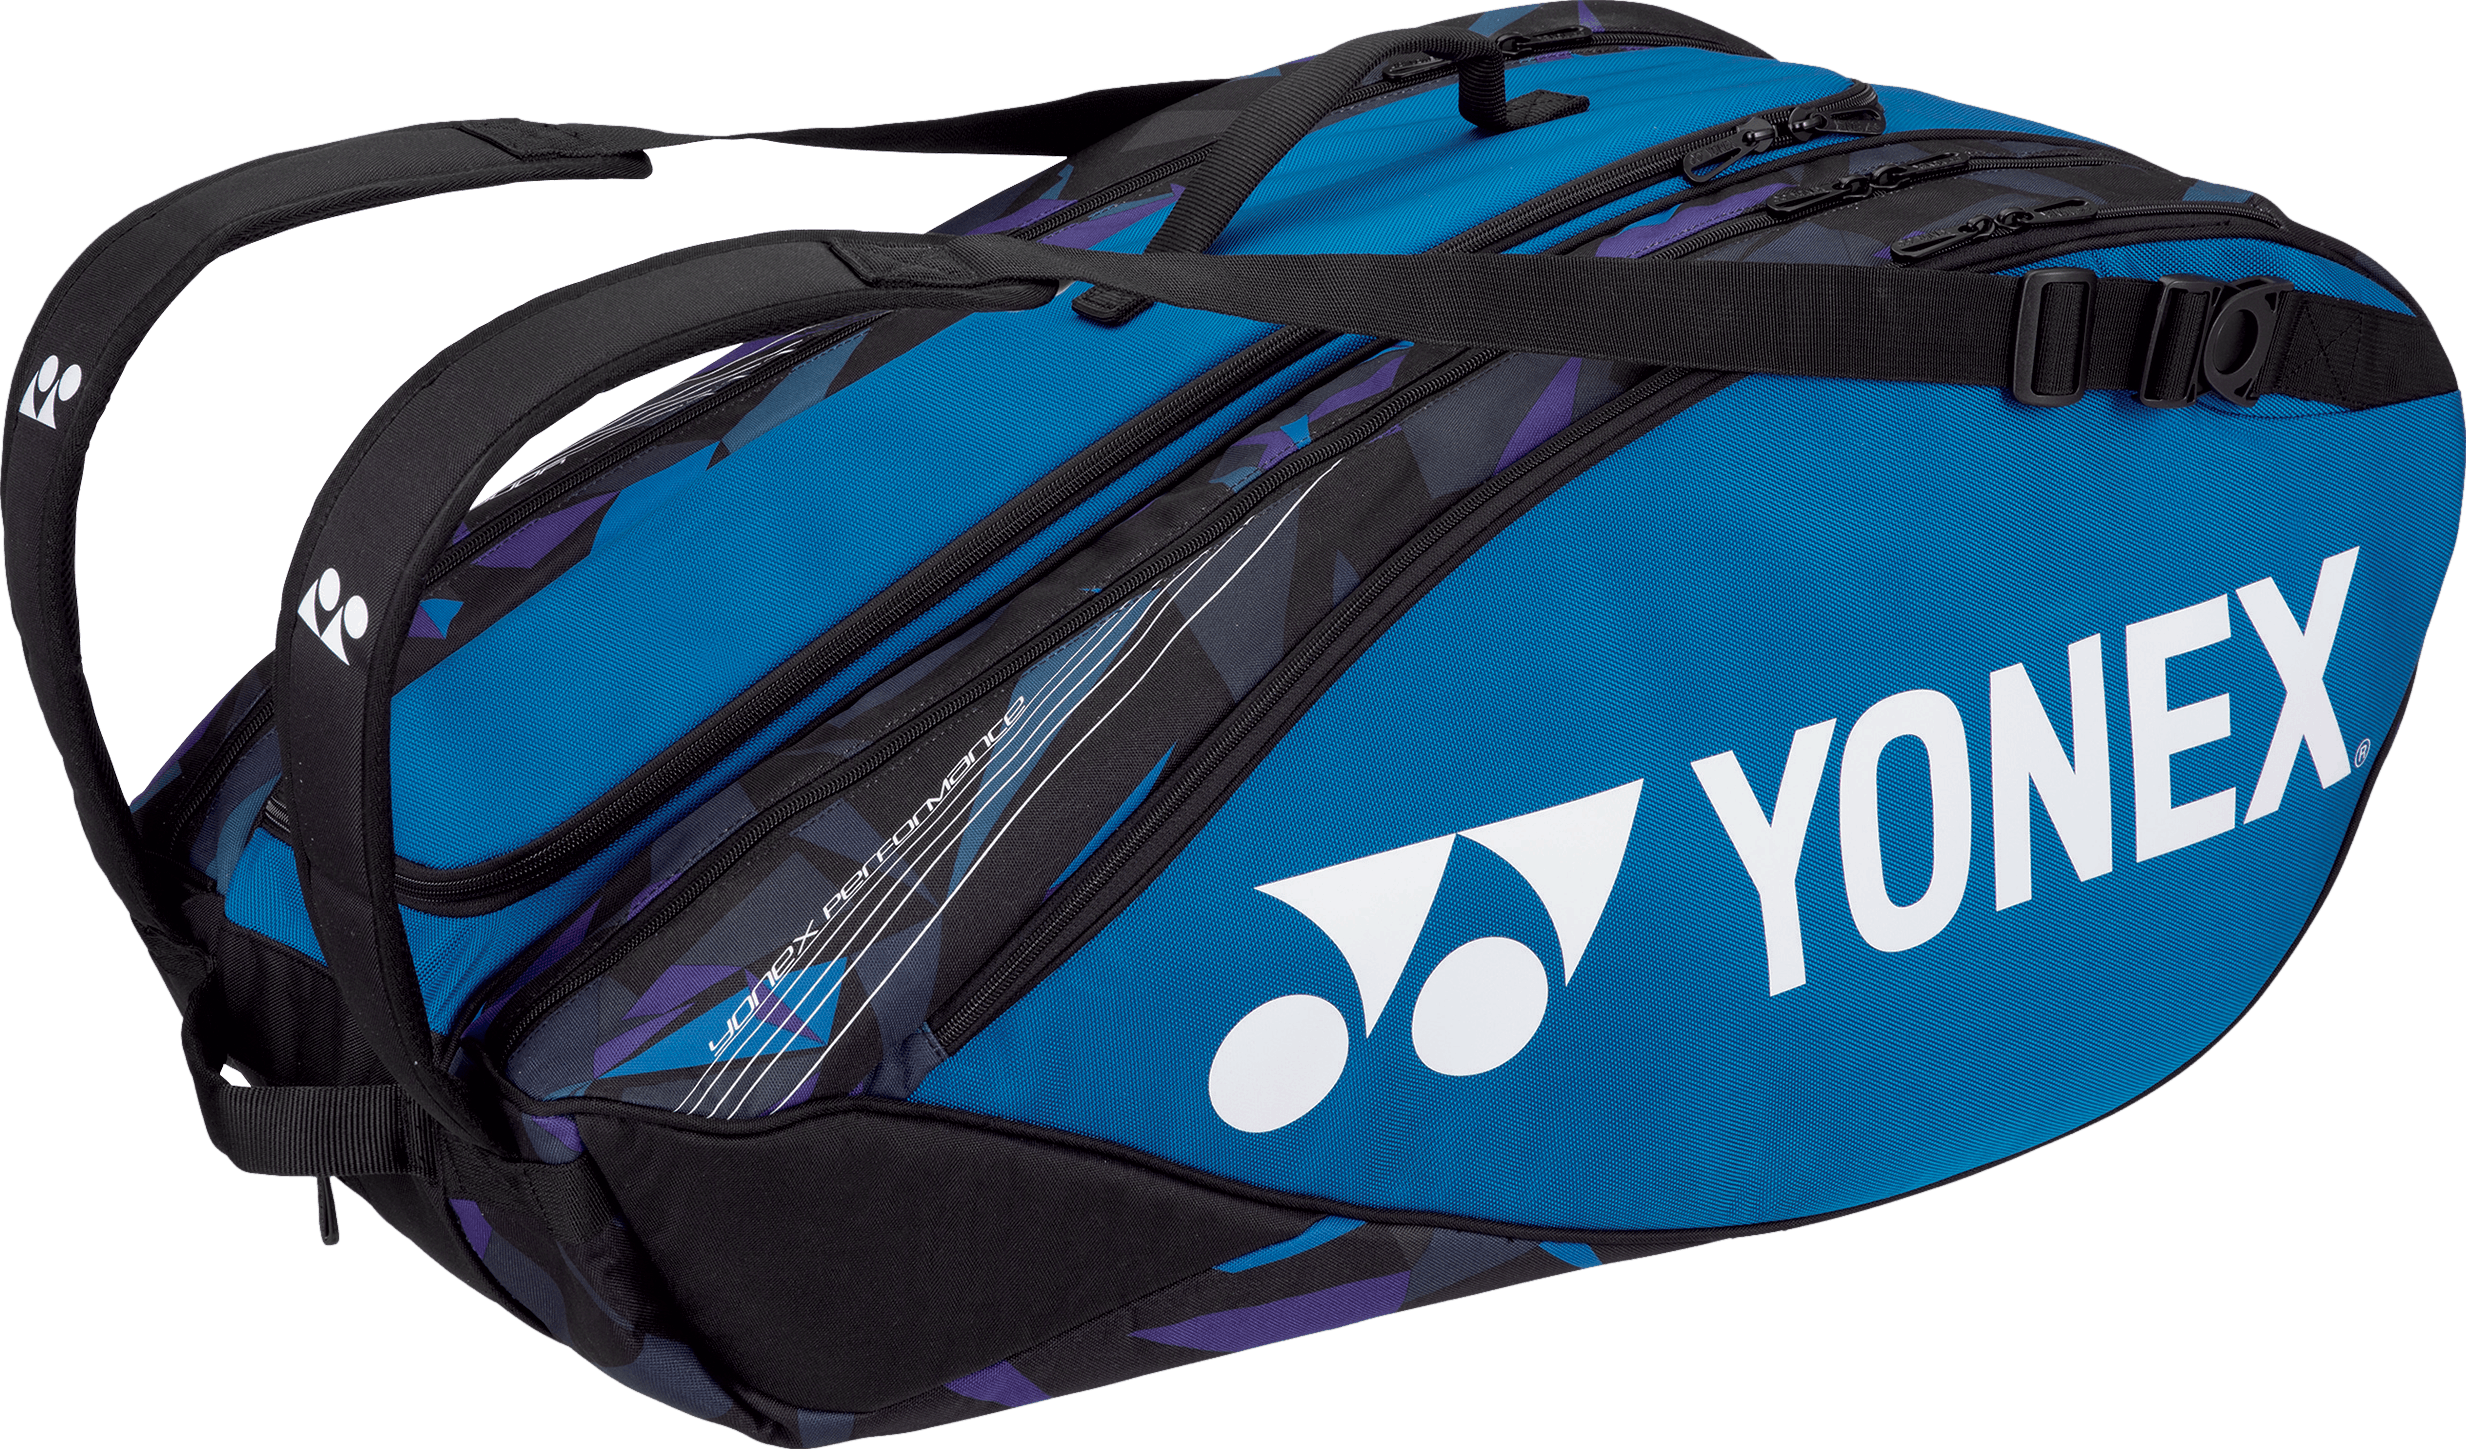 Buy Yonex Bag KP 09 BT6 Racquet Bag (Red/Black) Online at Low Prices in  India - Amazon.in